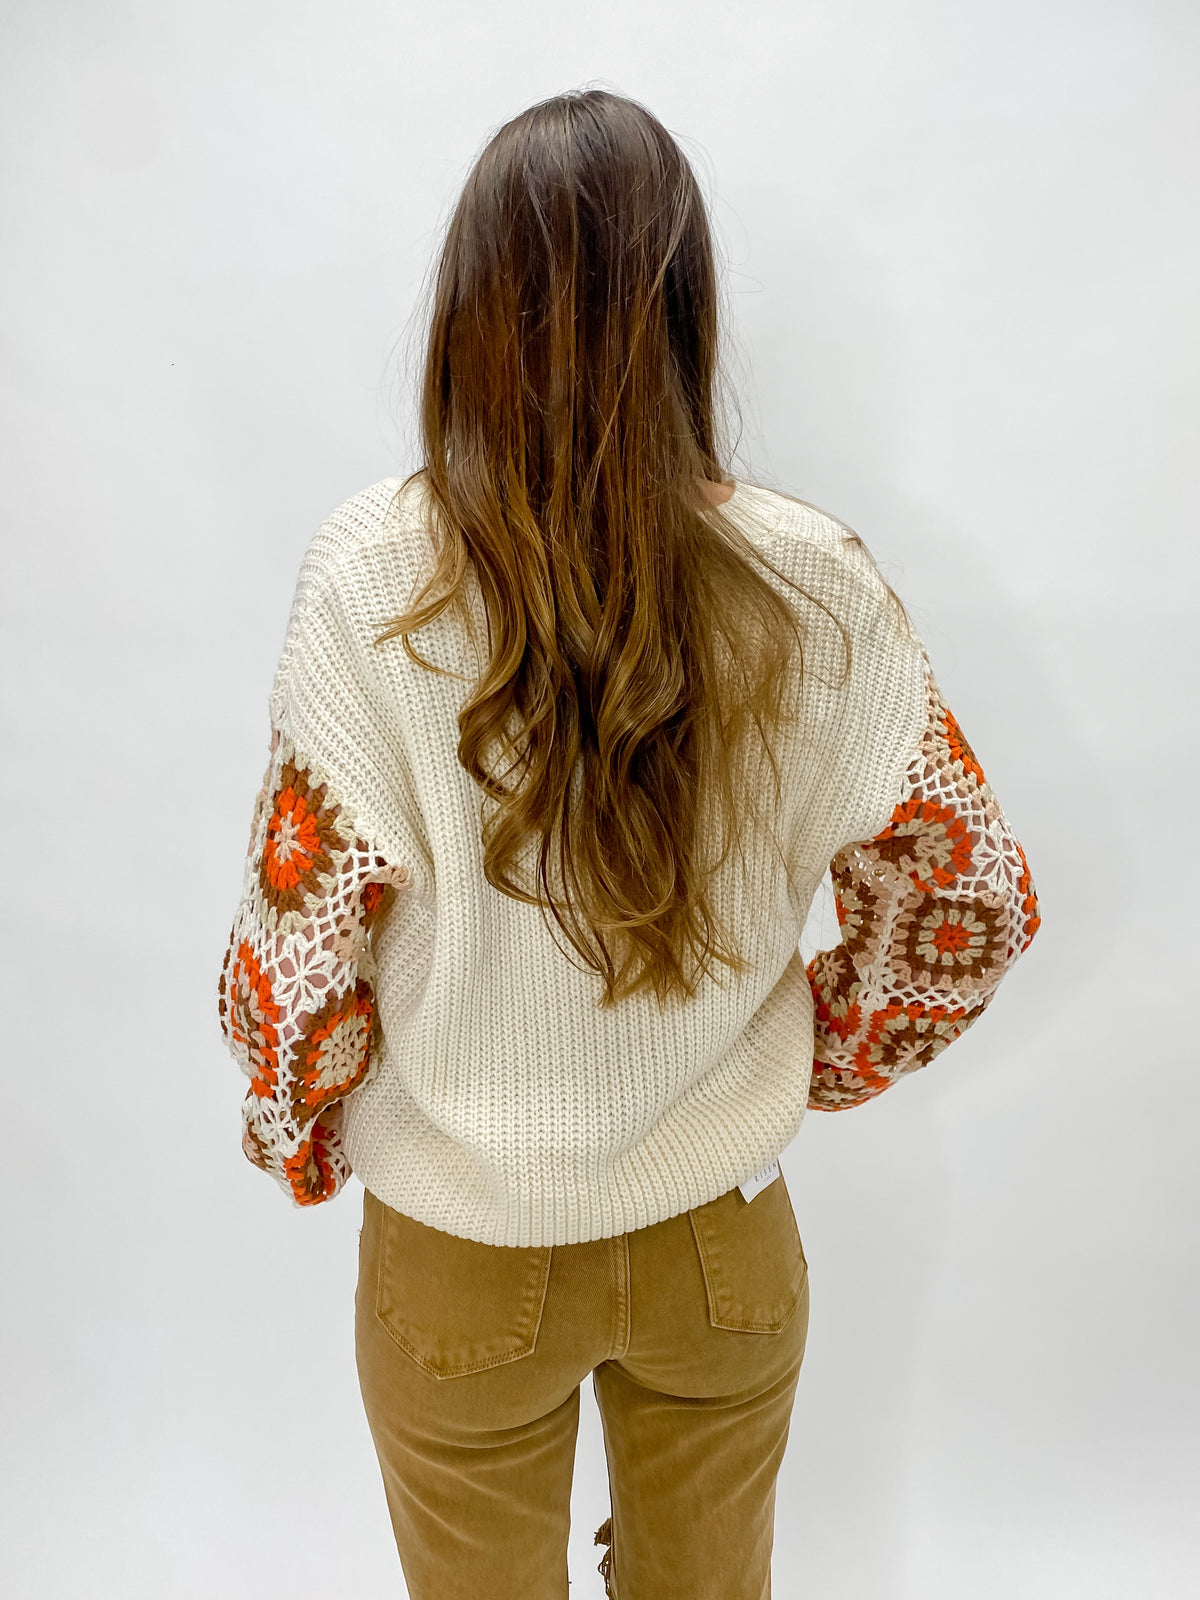 Cozy Up By The Fire Cream V-Neck Sweater With Granny Square Crochet